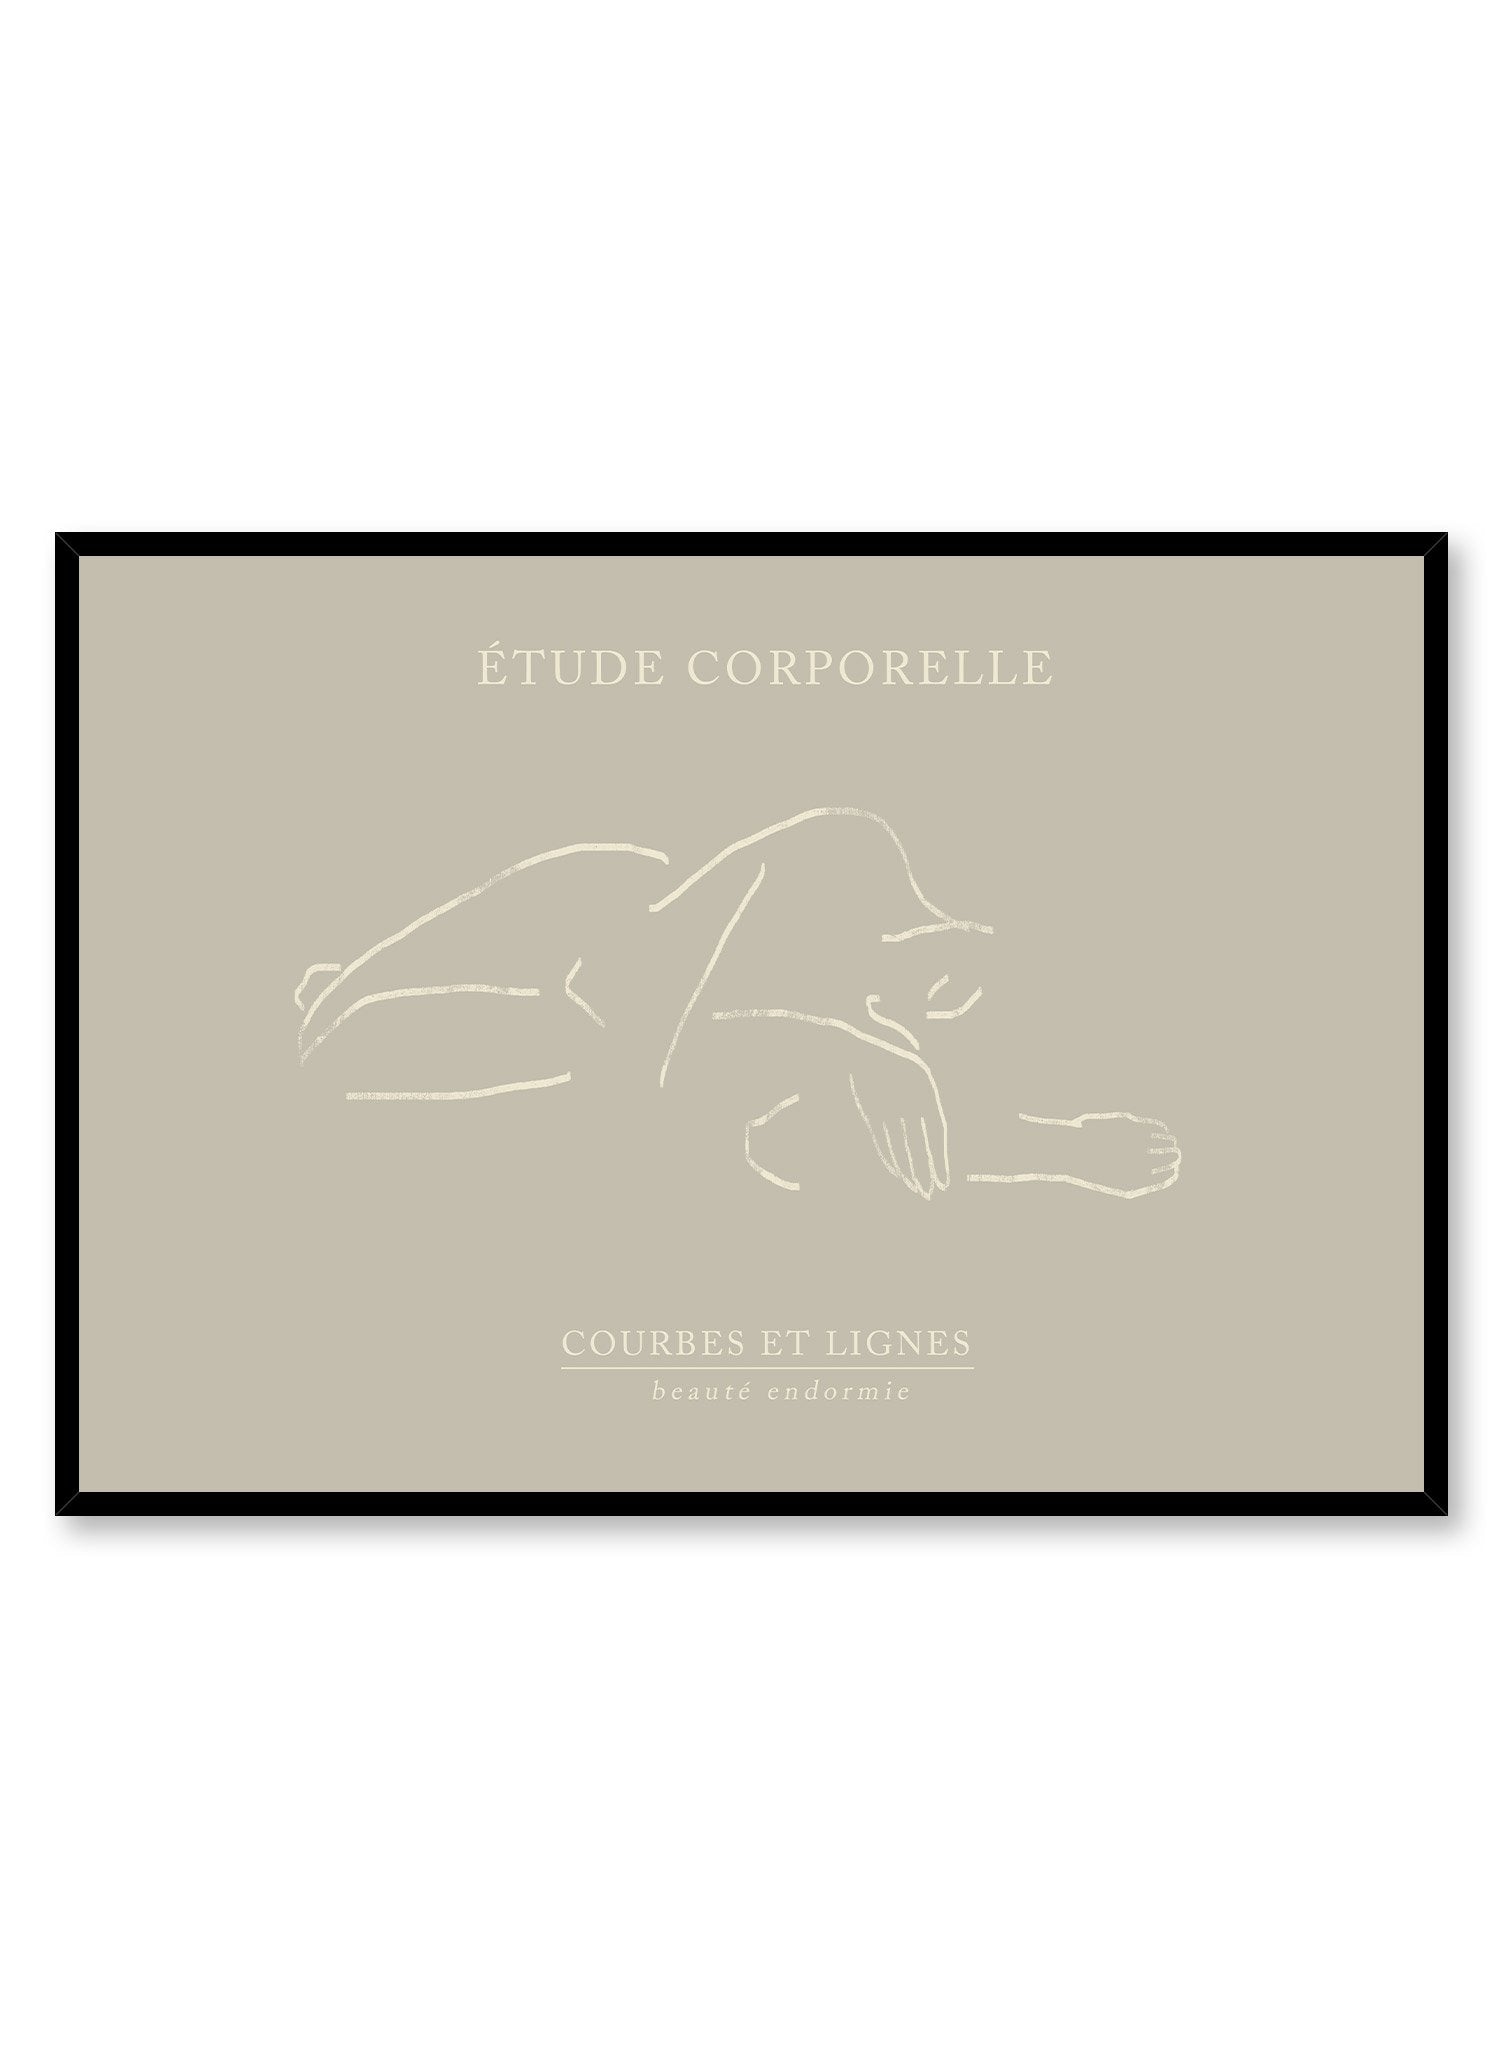 Inward is a line art illustration of the silhouette of a woman sleeping by Opposite Wall.